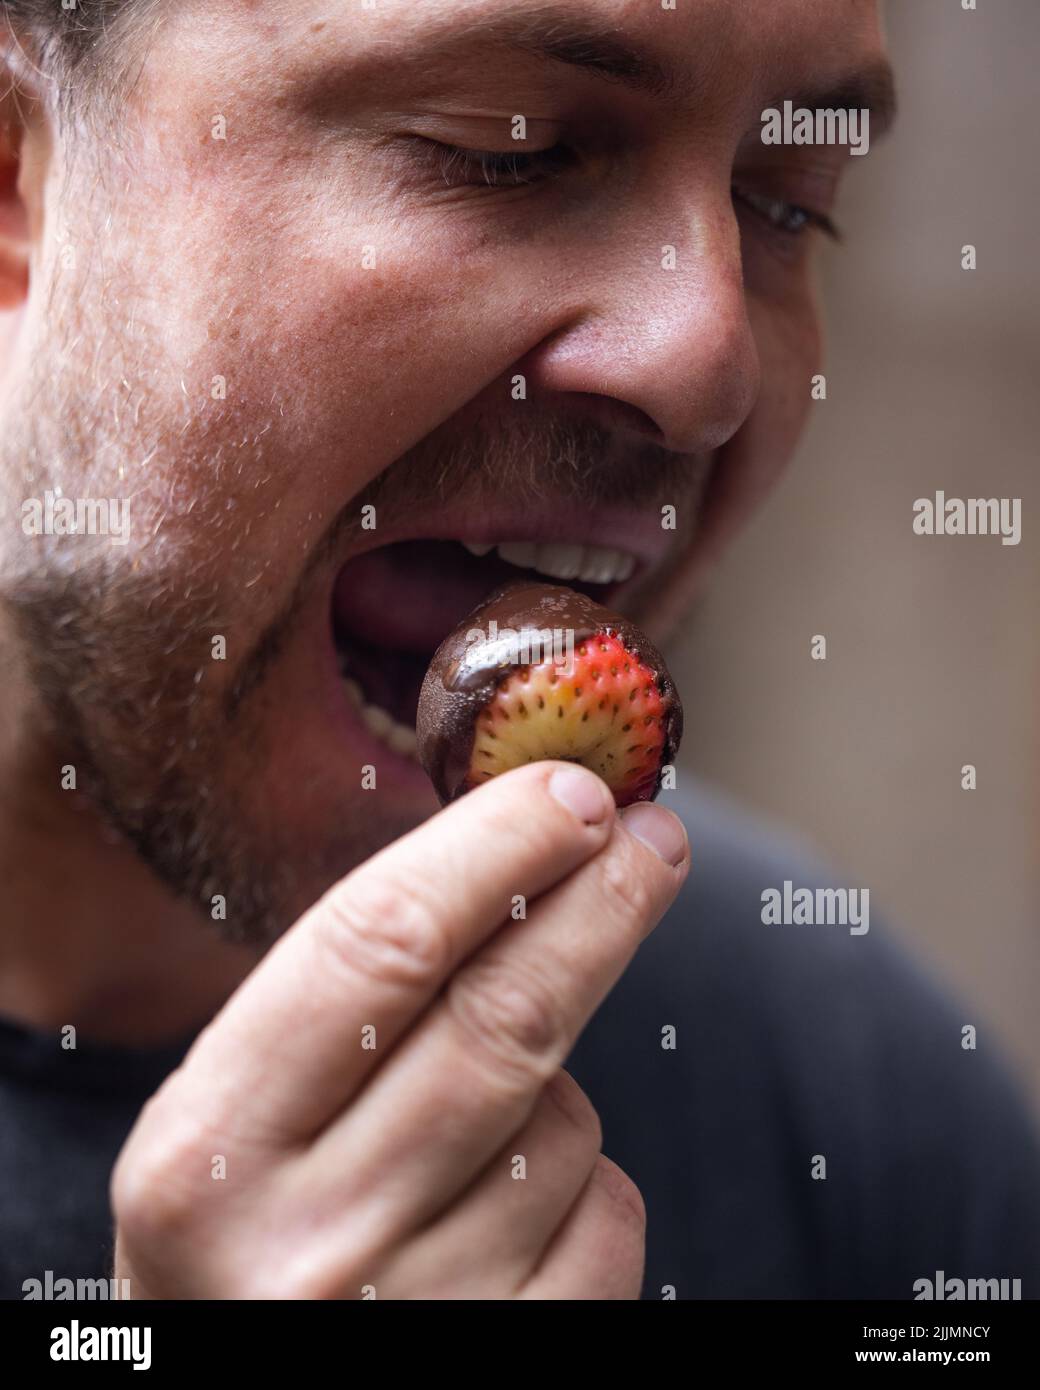 Man eating a chocolate covered strawberry close up portrait Stock Photo